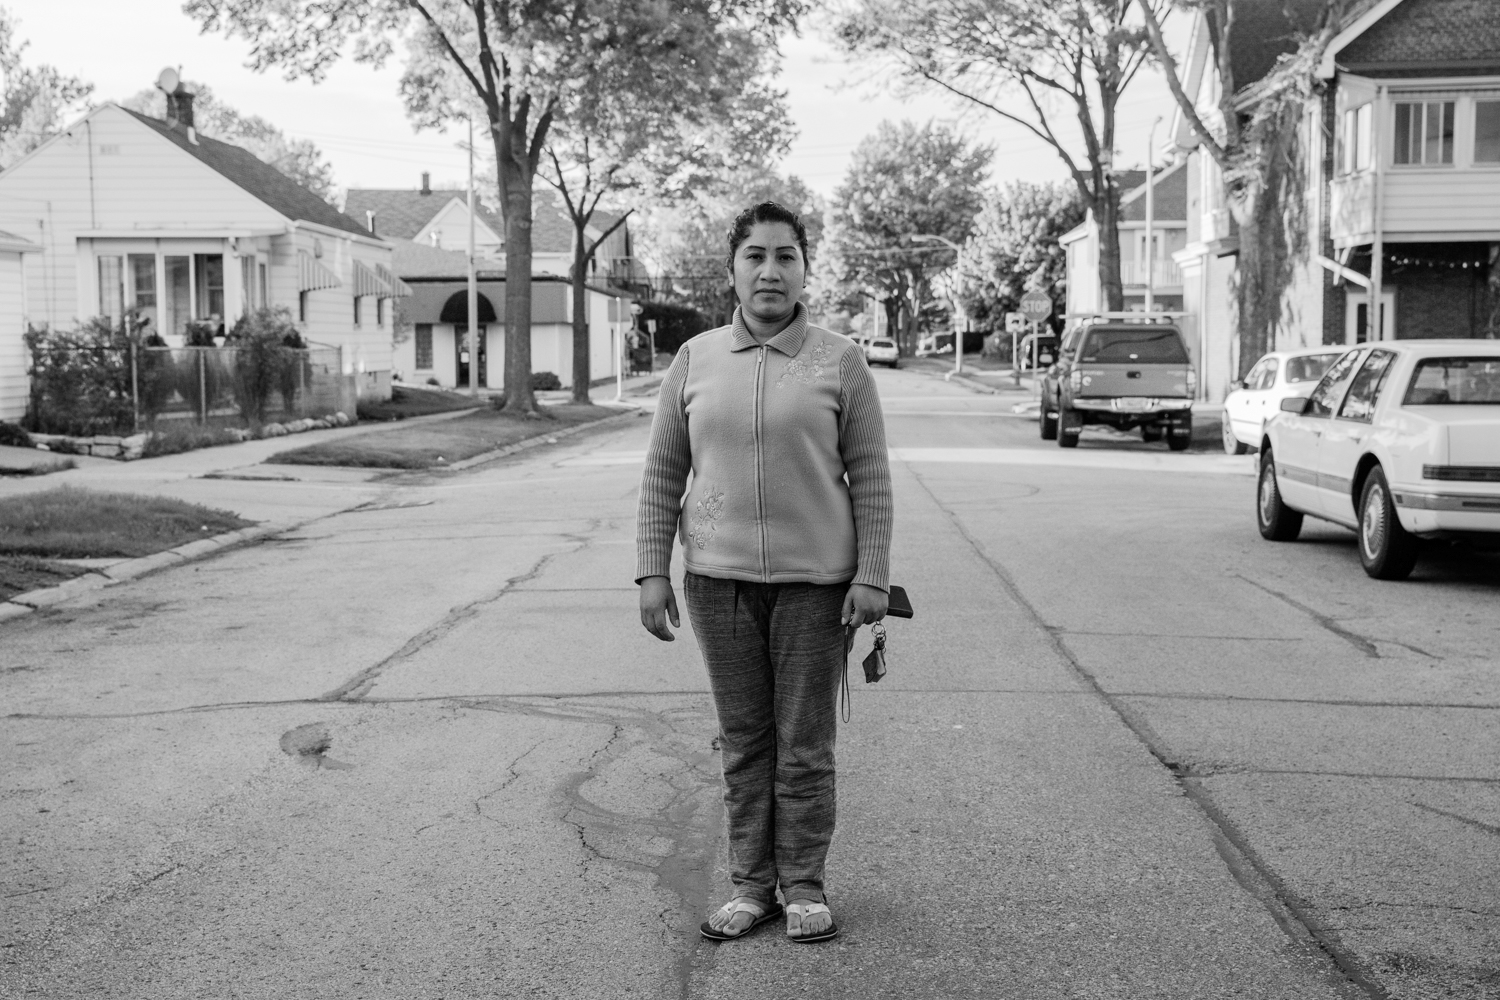 A single mom poses in the suburbs where she raises her two children. Milwaukee, Wisconsin, USA.